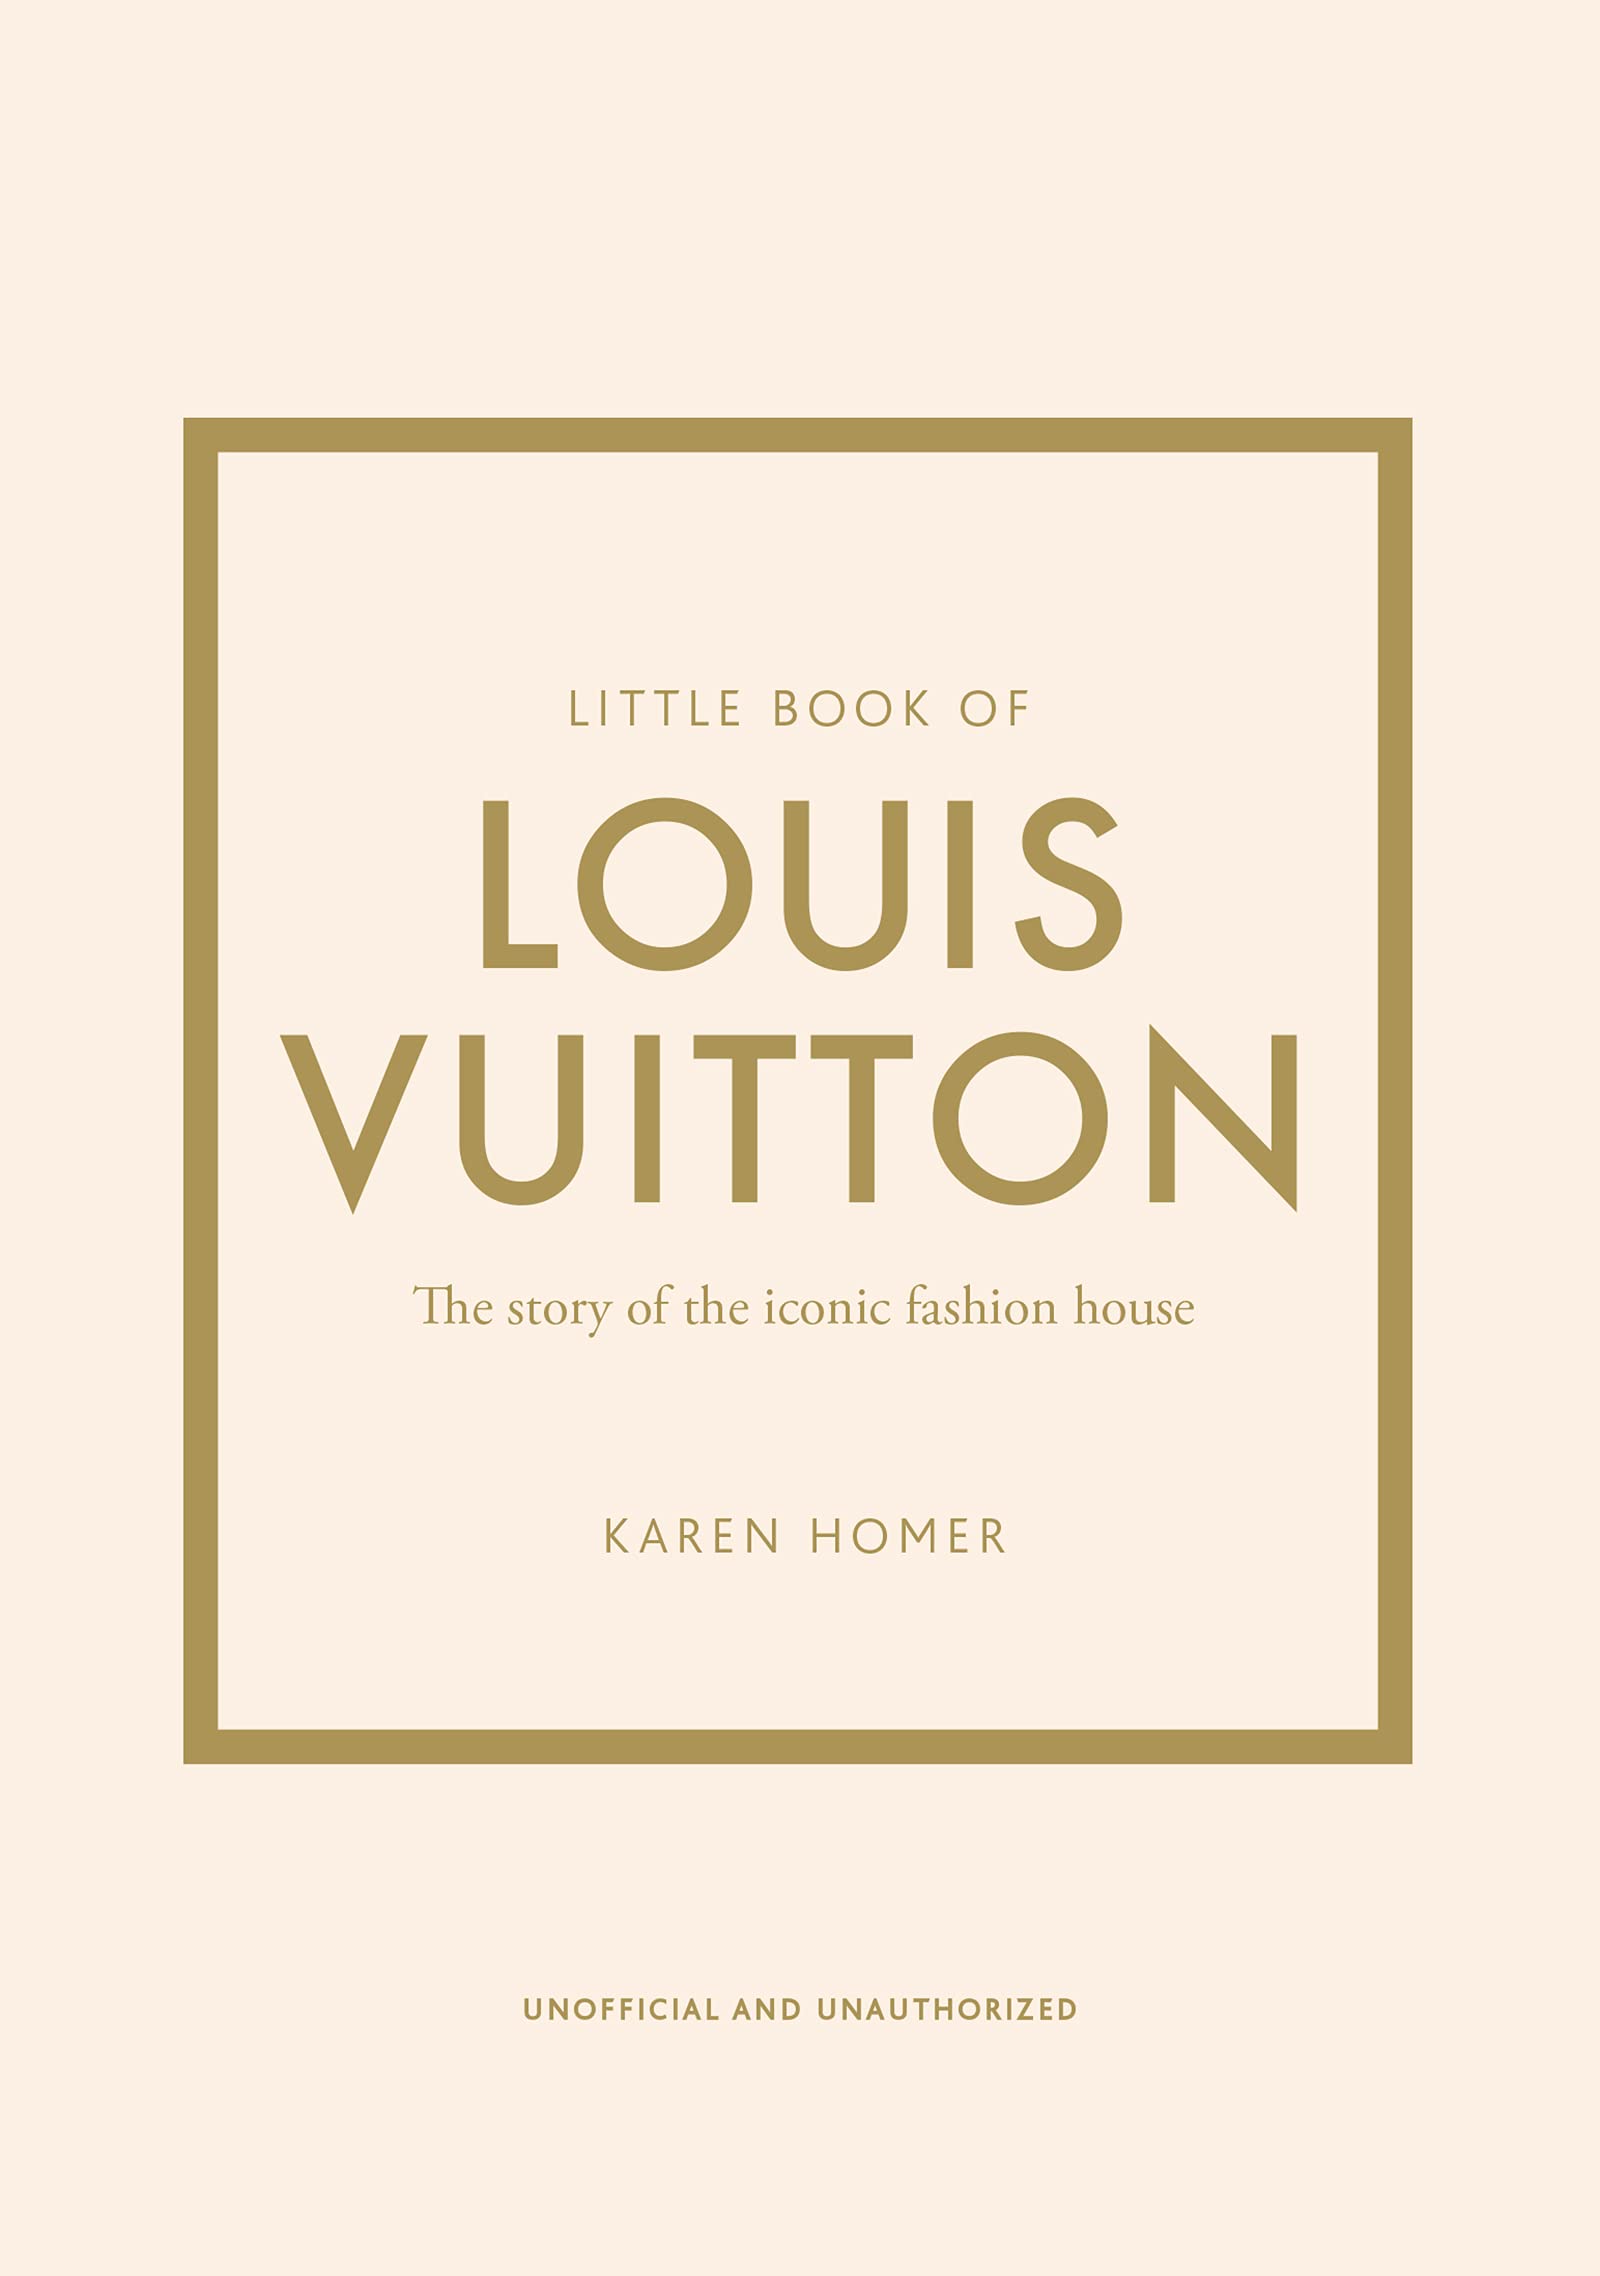 Little Book of Louis Vuitton: The Story of the Iconic Fashion House (Little Books of Fashion #9) (9TH ed.) - SureShot Books Publishing LLC